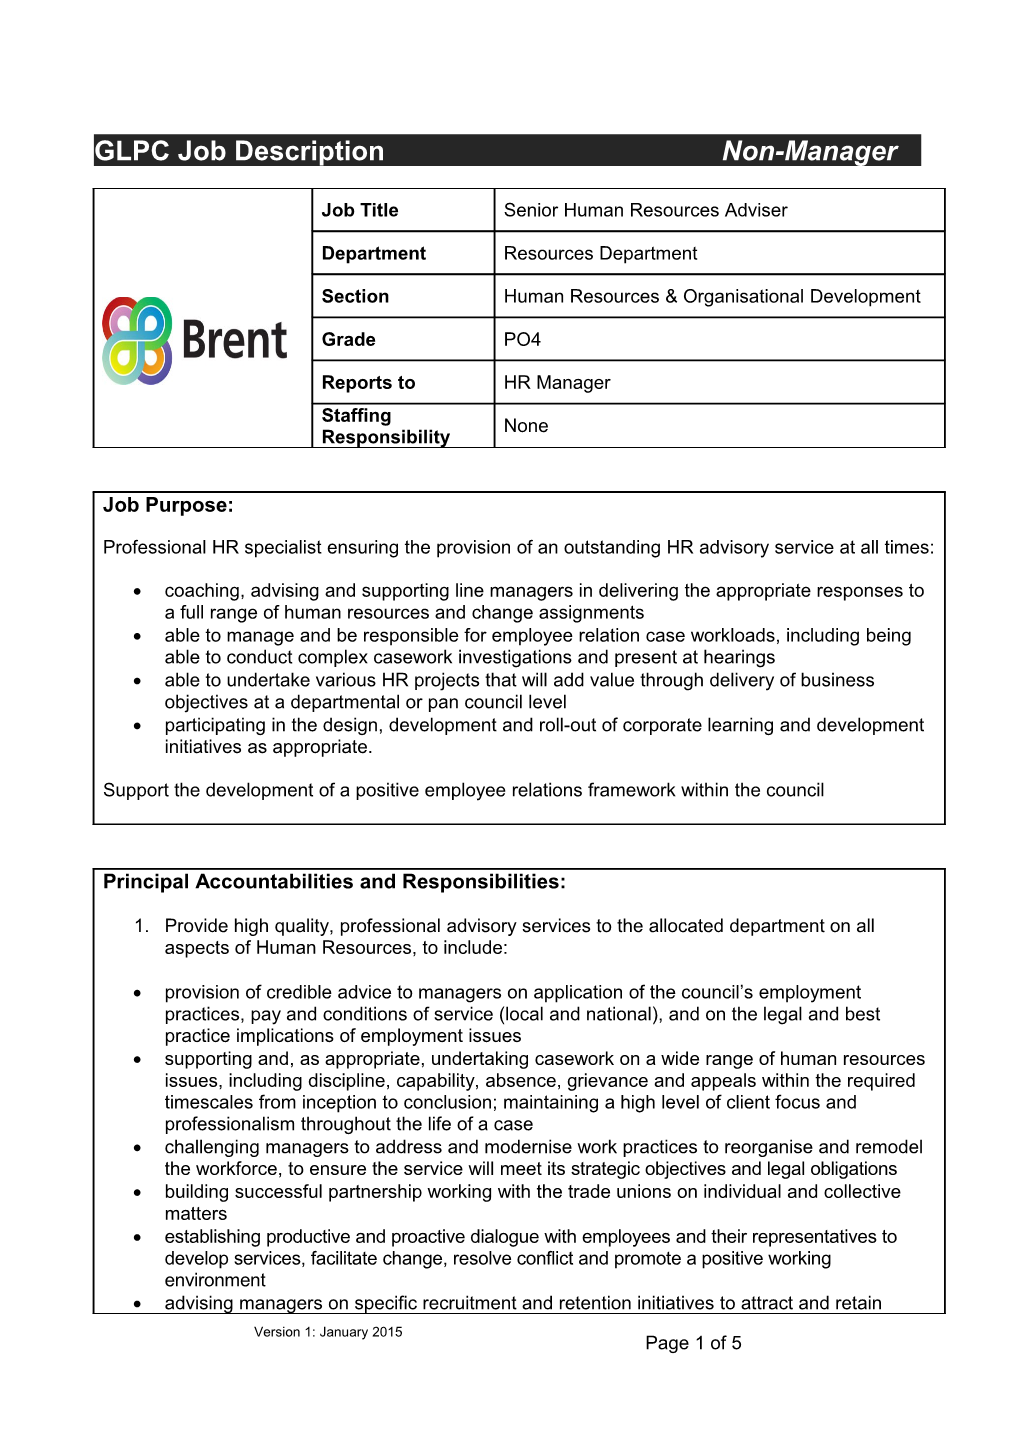 Application for Job Evaluation s3